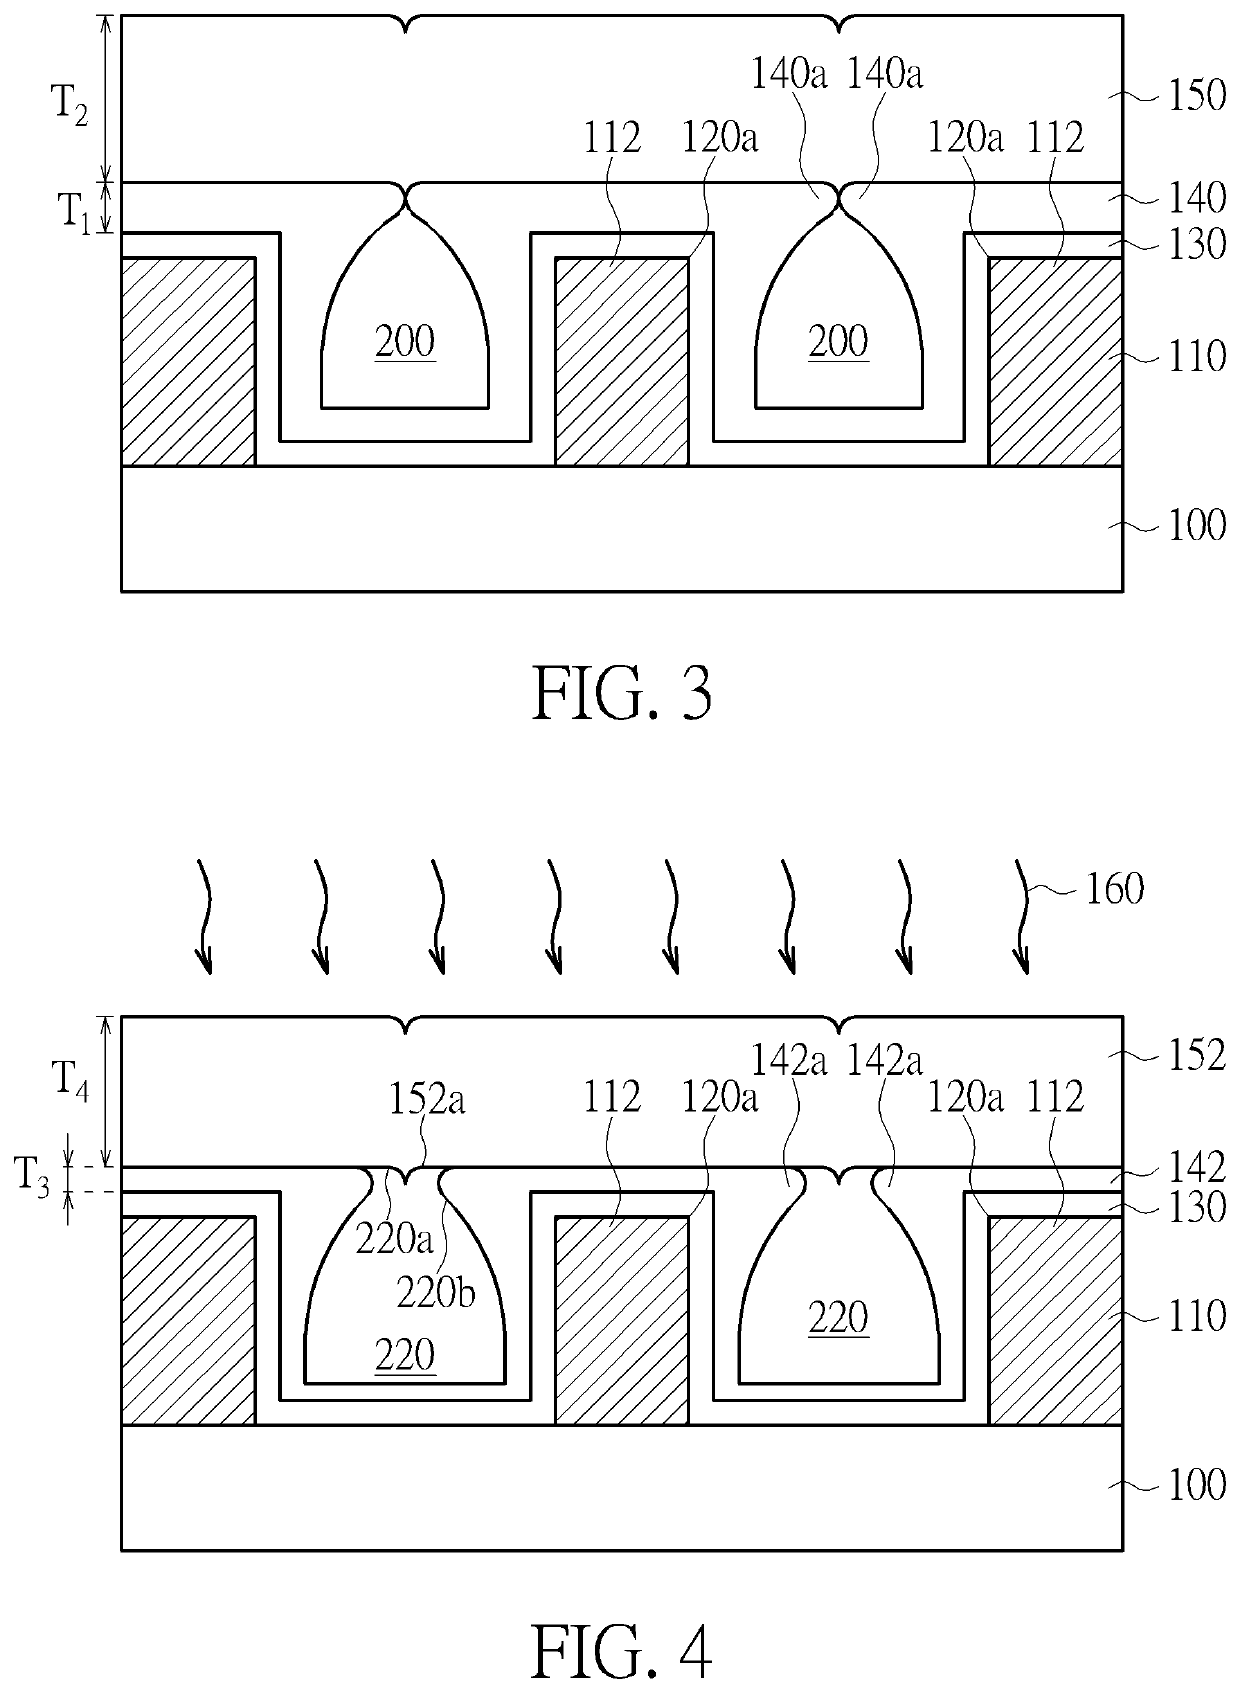 Interconnection structure and method of forming the same